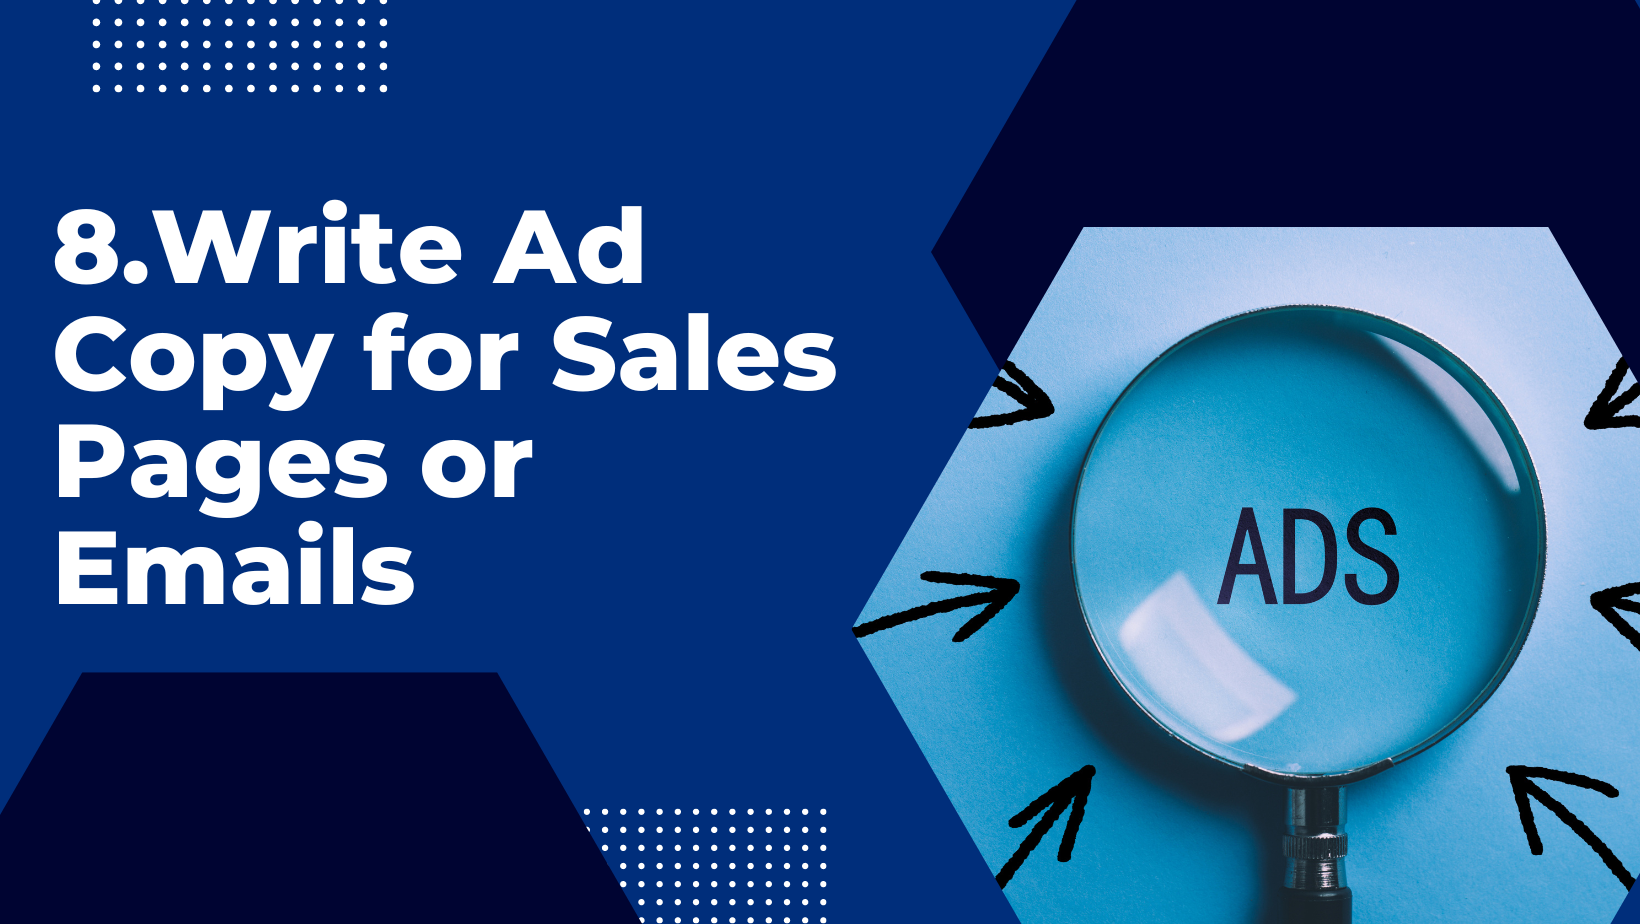 Write Ad Copy for Sales Pages or Emails